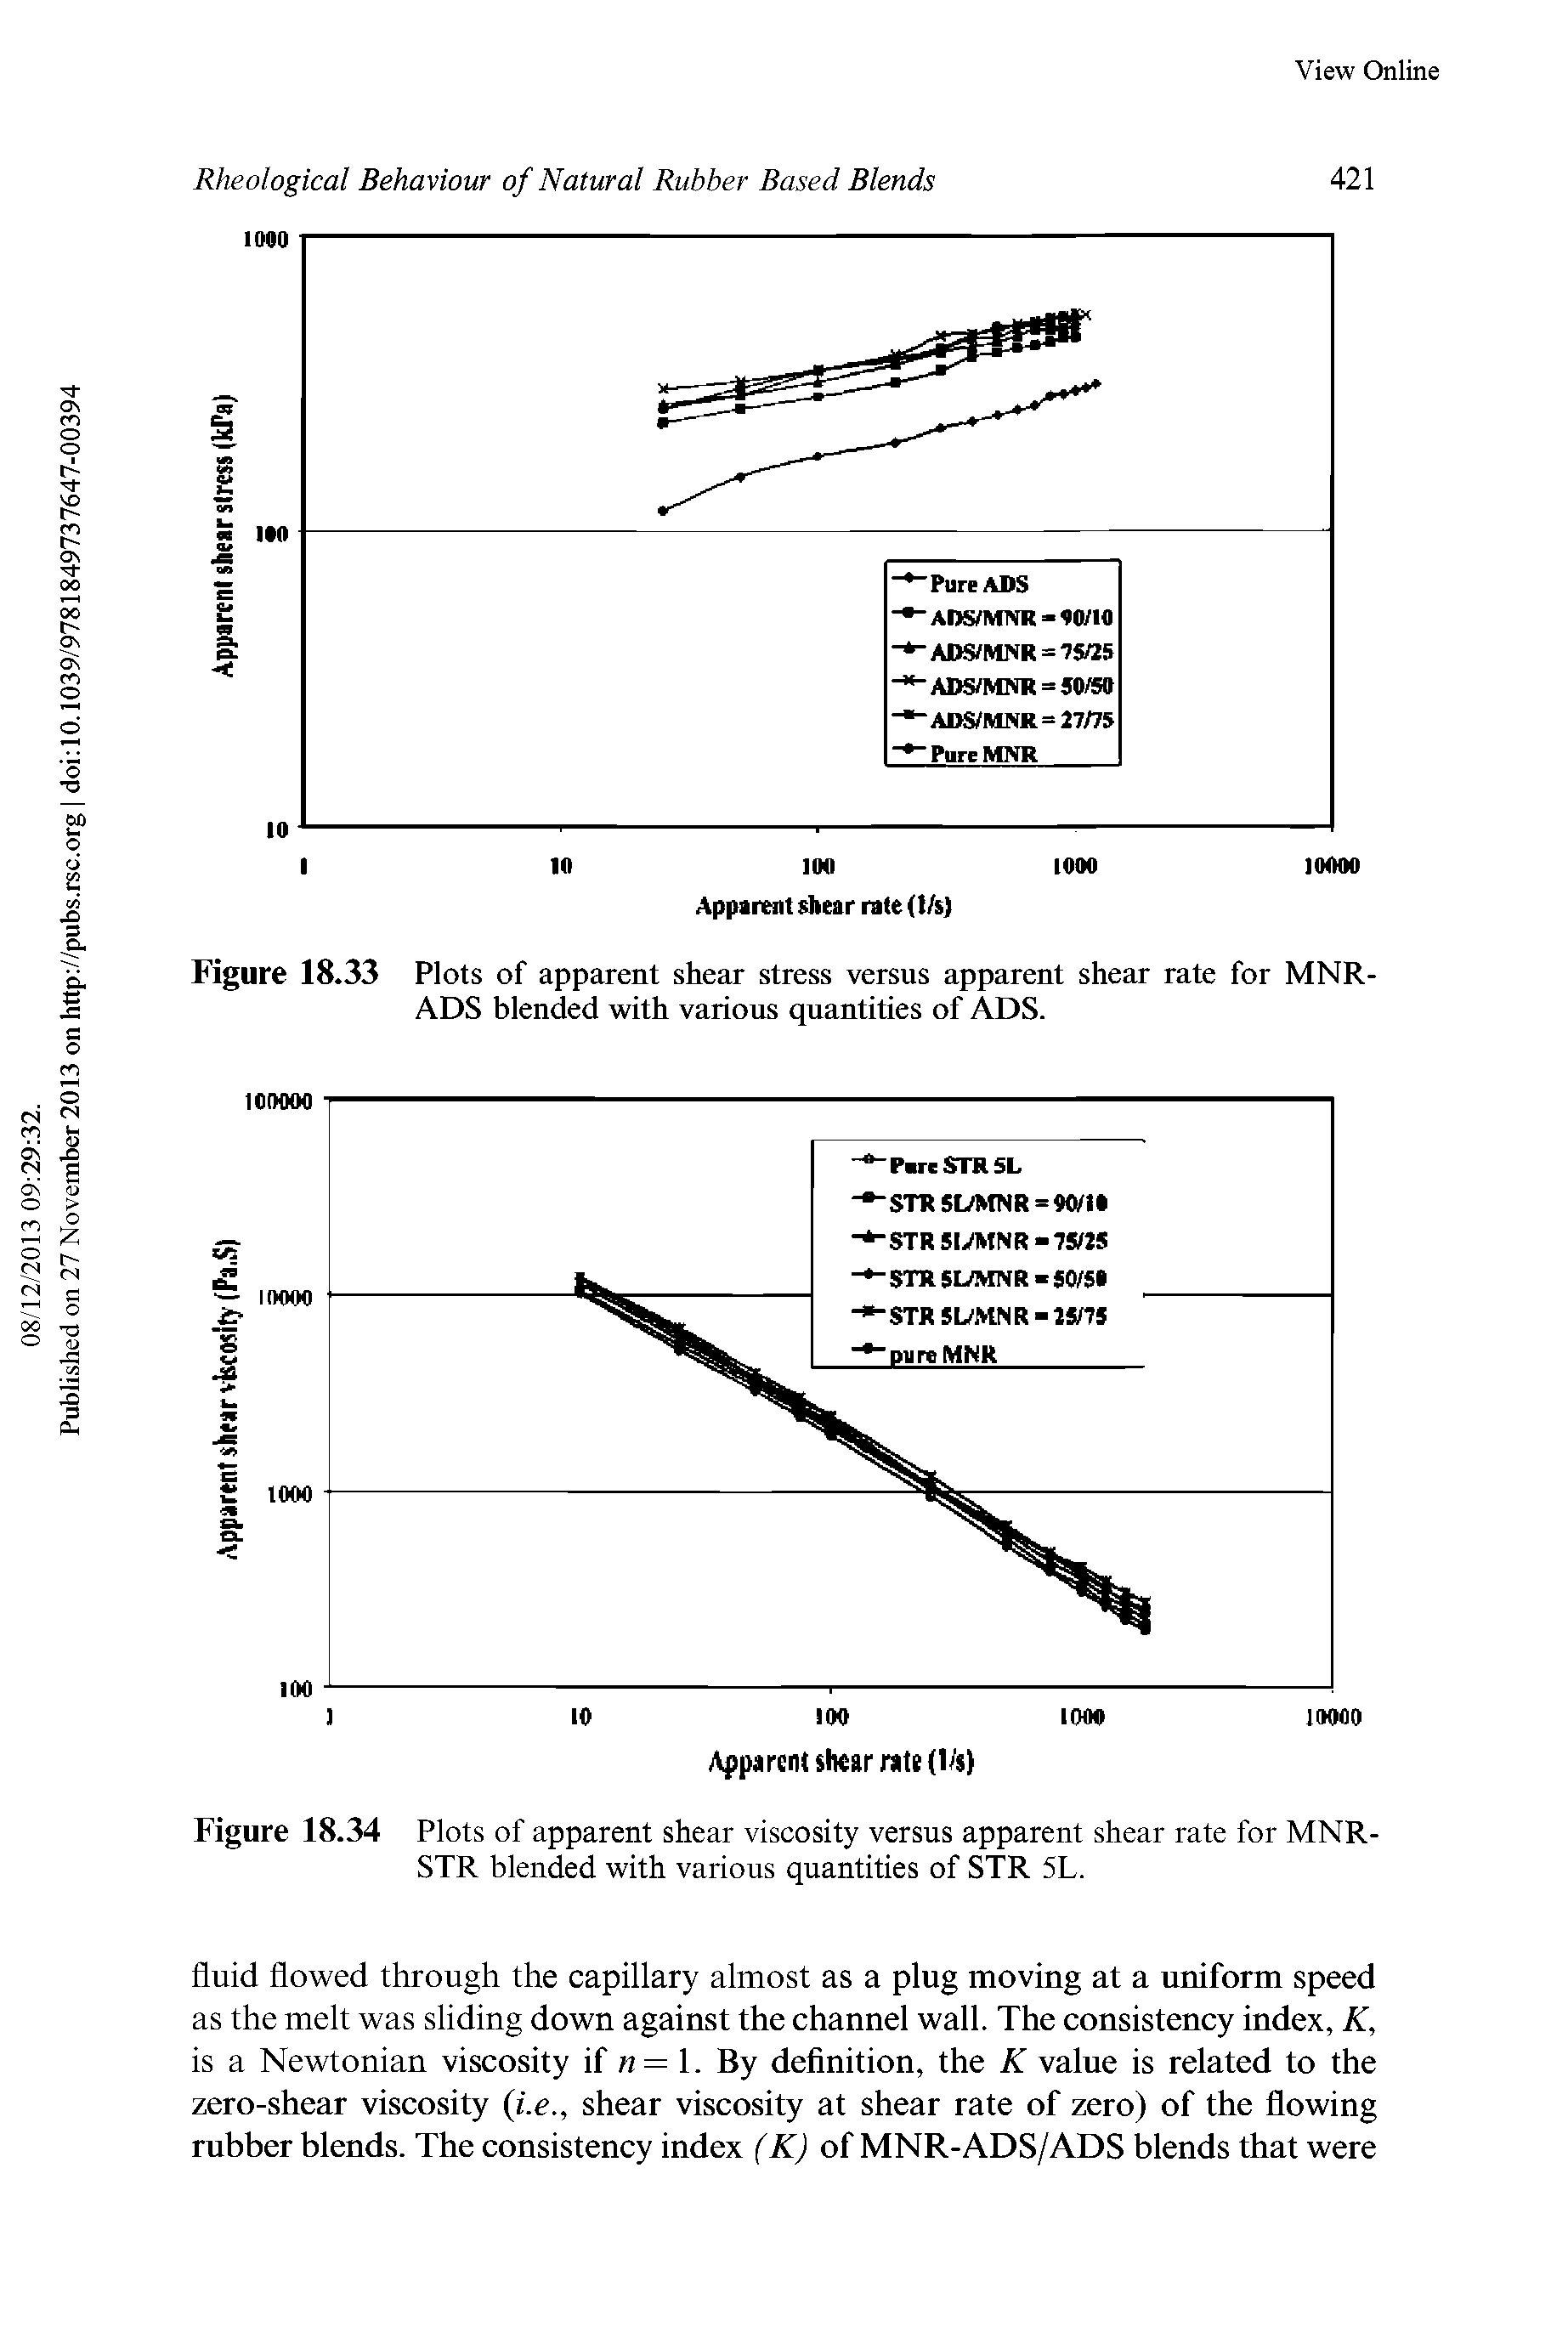 Figure 18.34 Plots of apparent shear viscosity versus apparent shear rate for MNR-STR blended with various quantities of STR 5L.